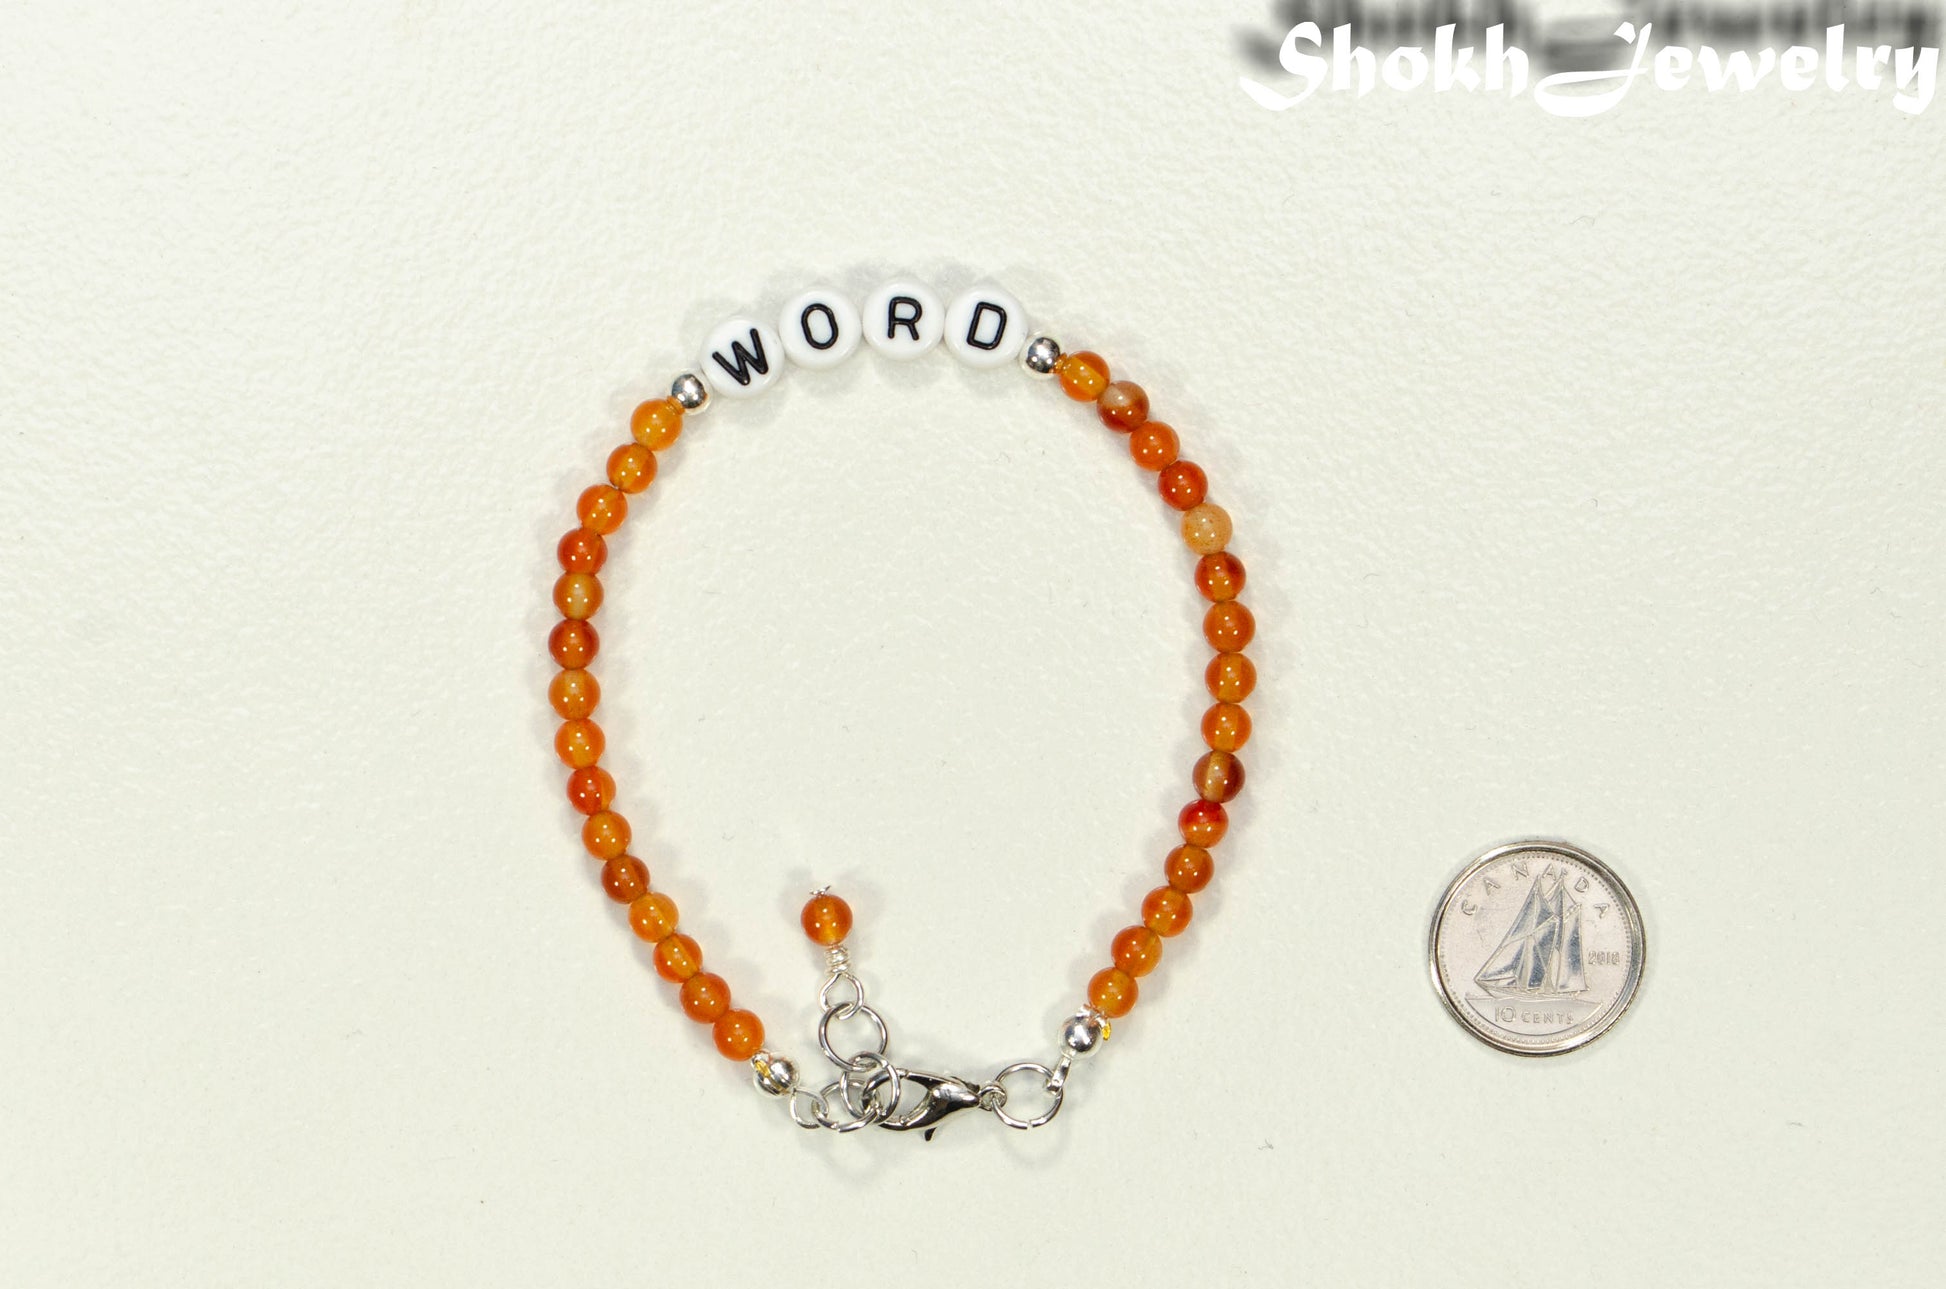 Personalized Carnelian Crystal Bracelet with Clasp beside a dime.